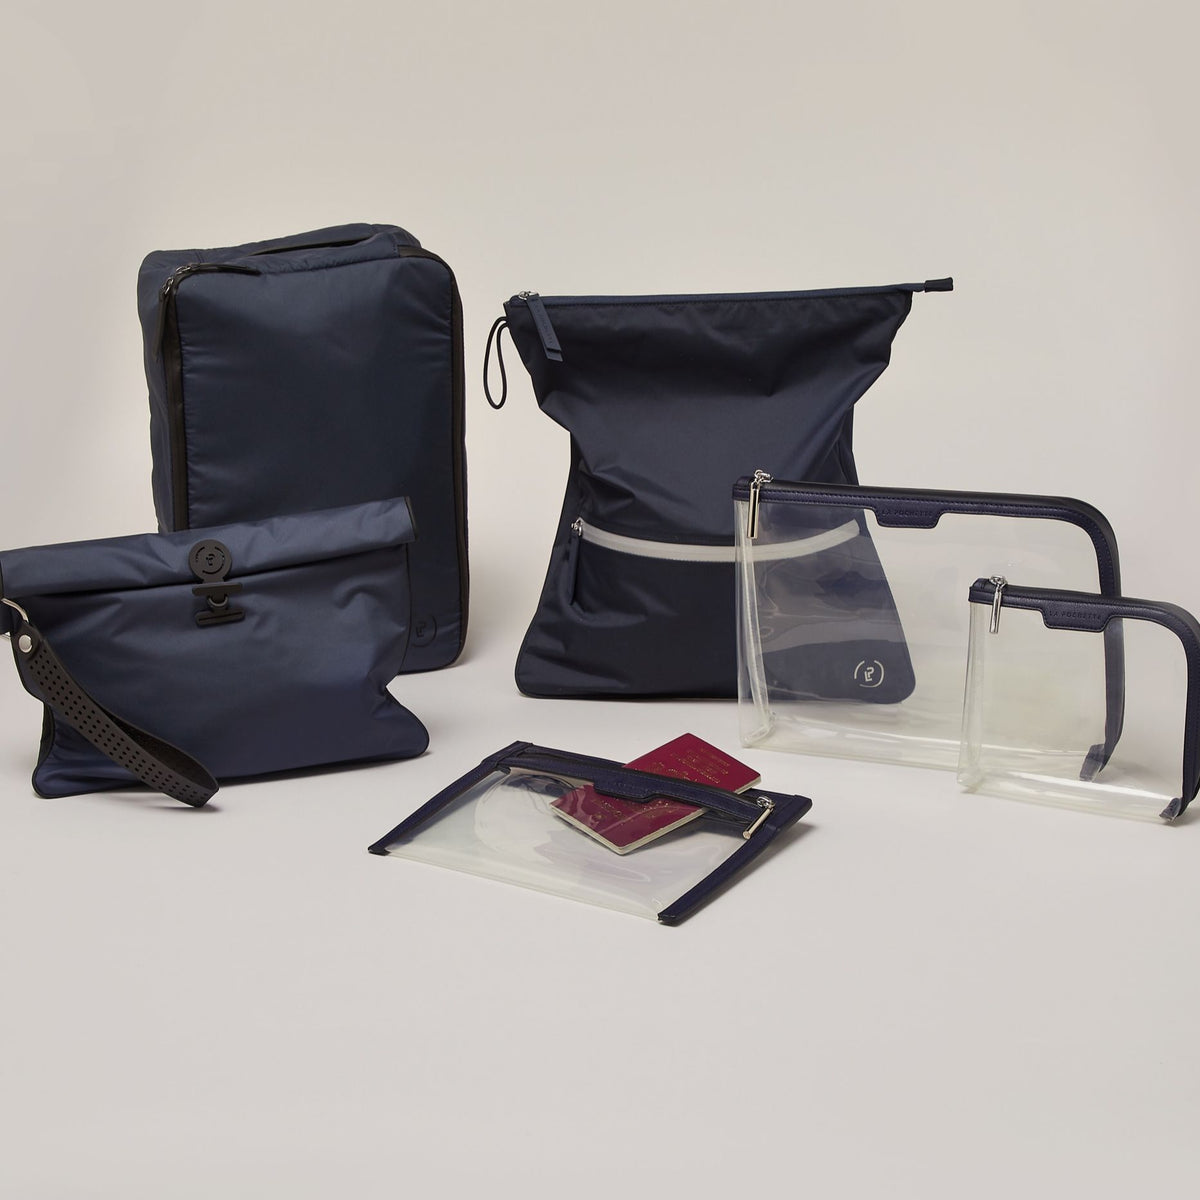 A collection of Midnight Ink products including a Small Shoe carry, large wet bag, Anywhere everywhere wallet, small pouch and large pouch, and a midnight  silver sweat bag